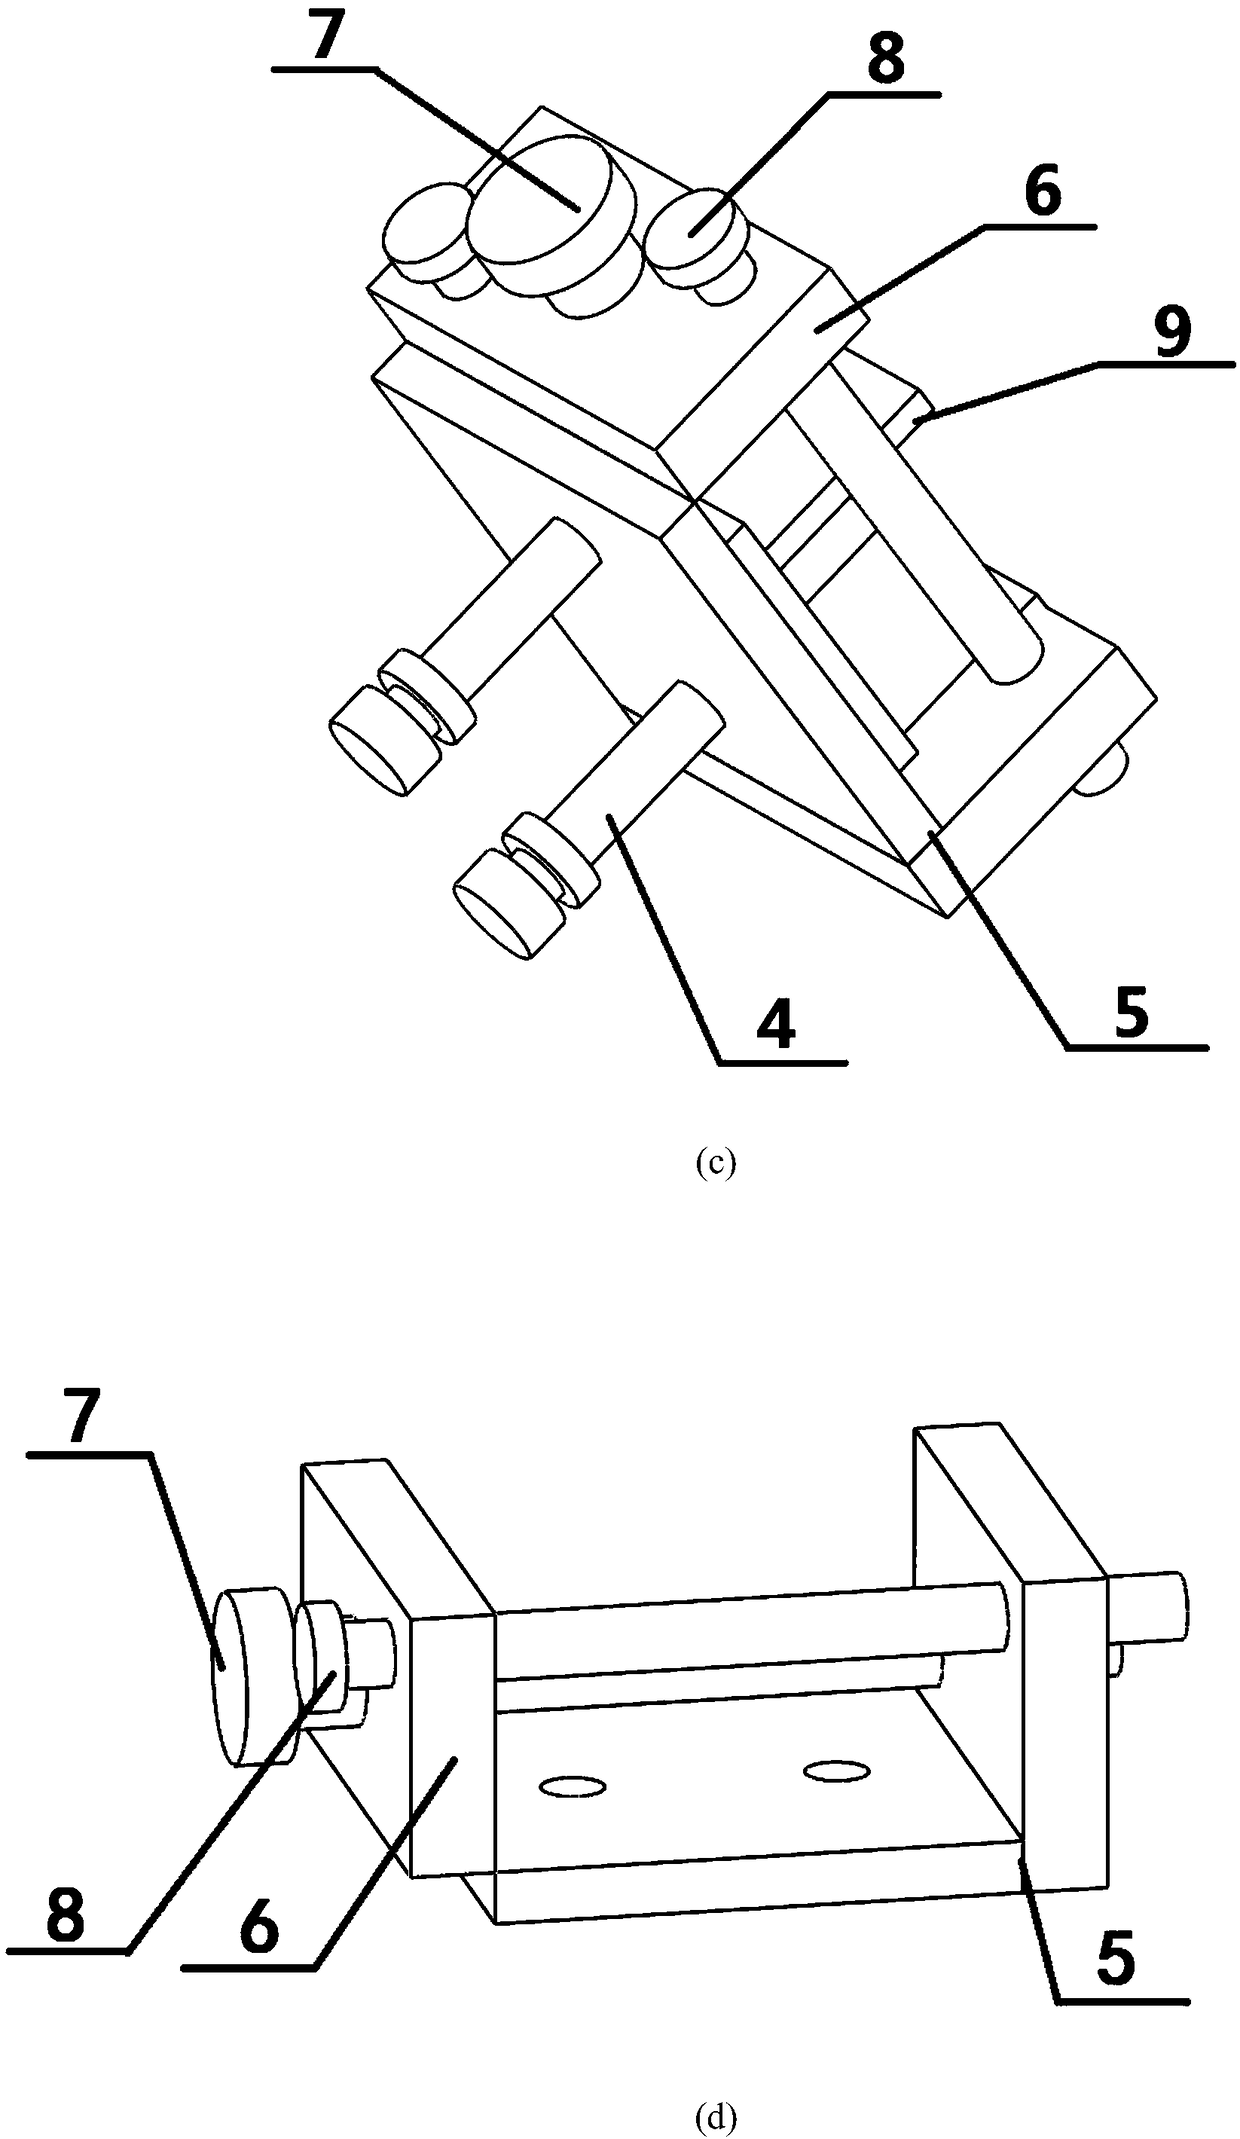 Clamping device applied to trimming arc surfaces of abrasive blocks of grinding wheel